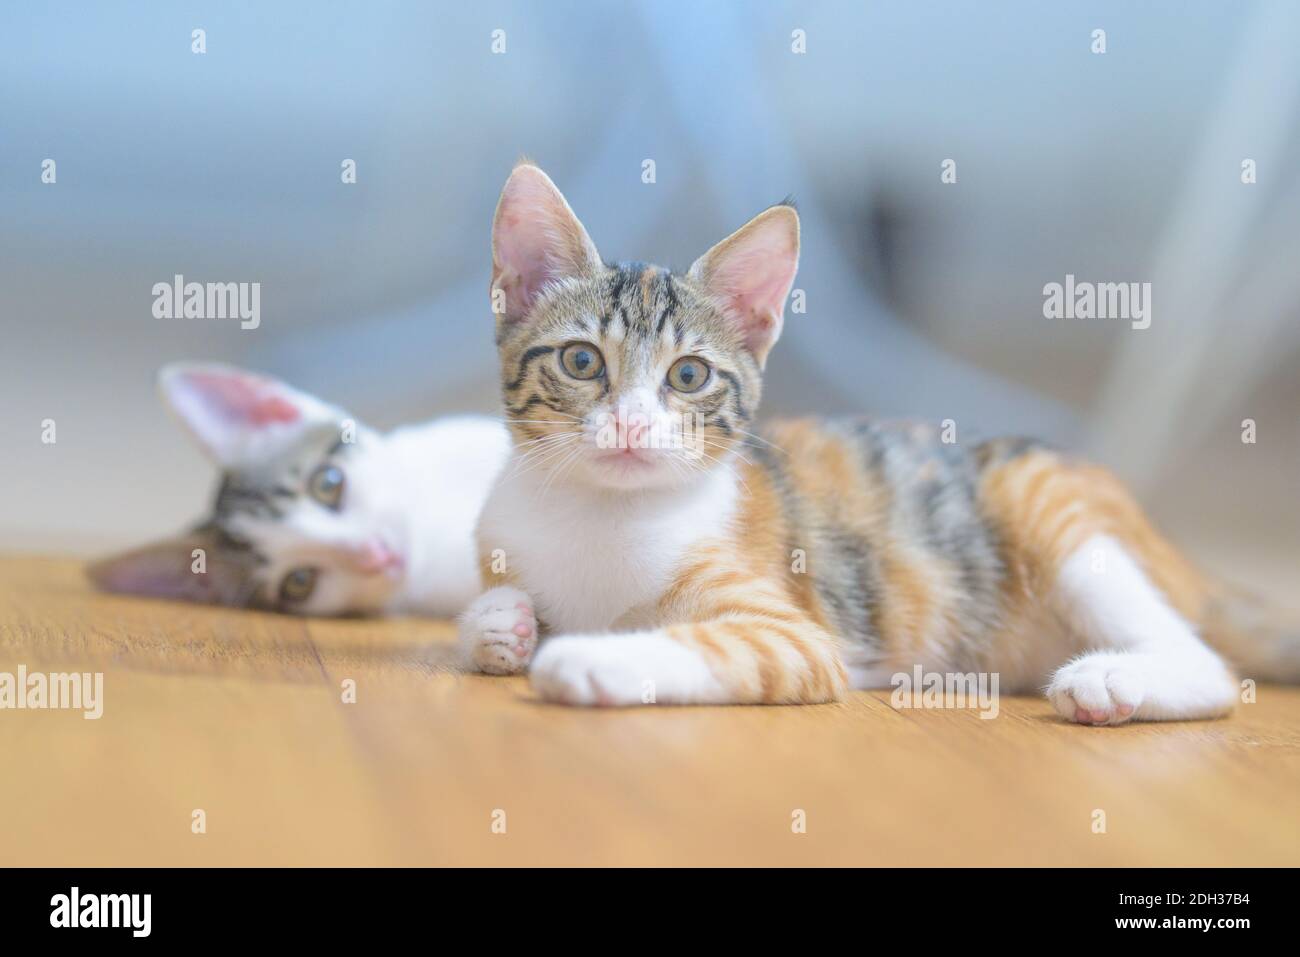 Tabby kitten looking at camera blurry background Stock Photo